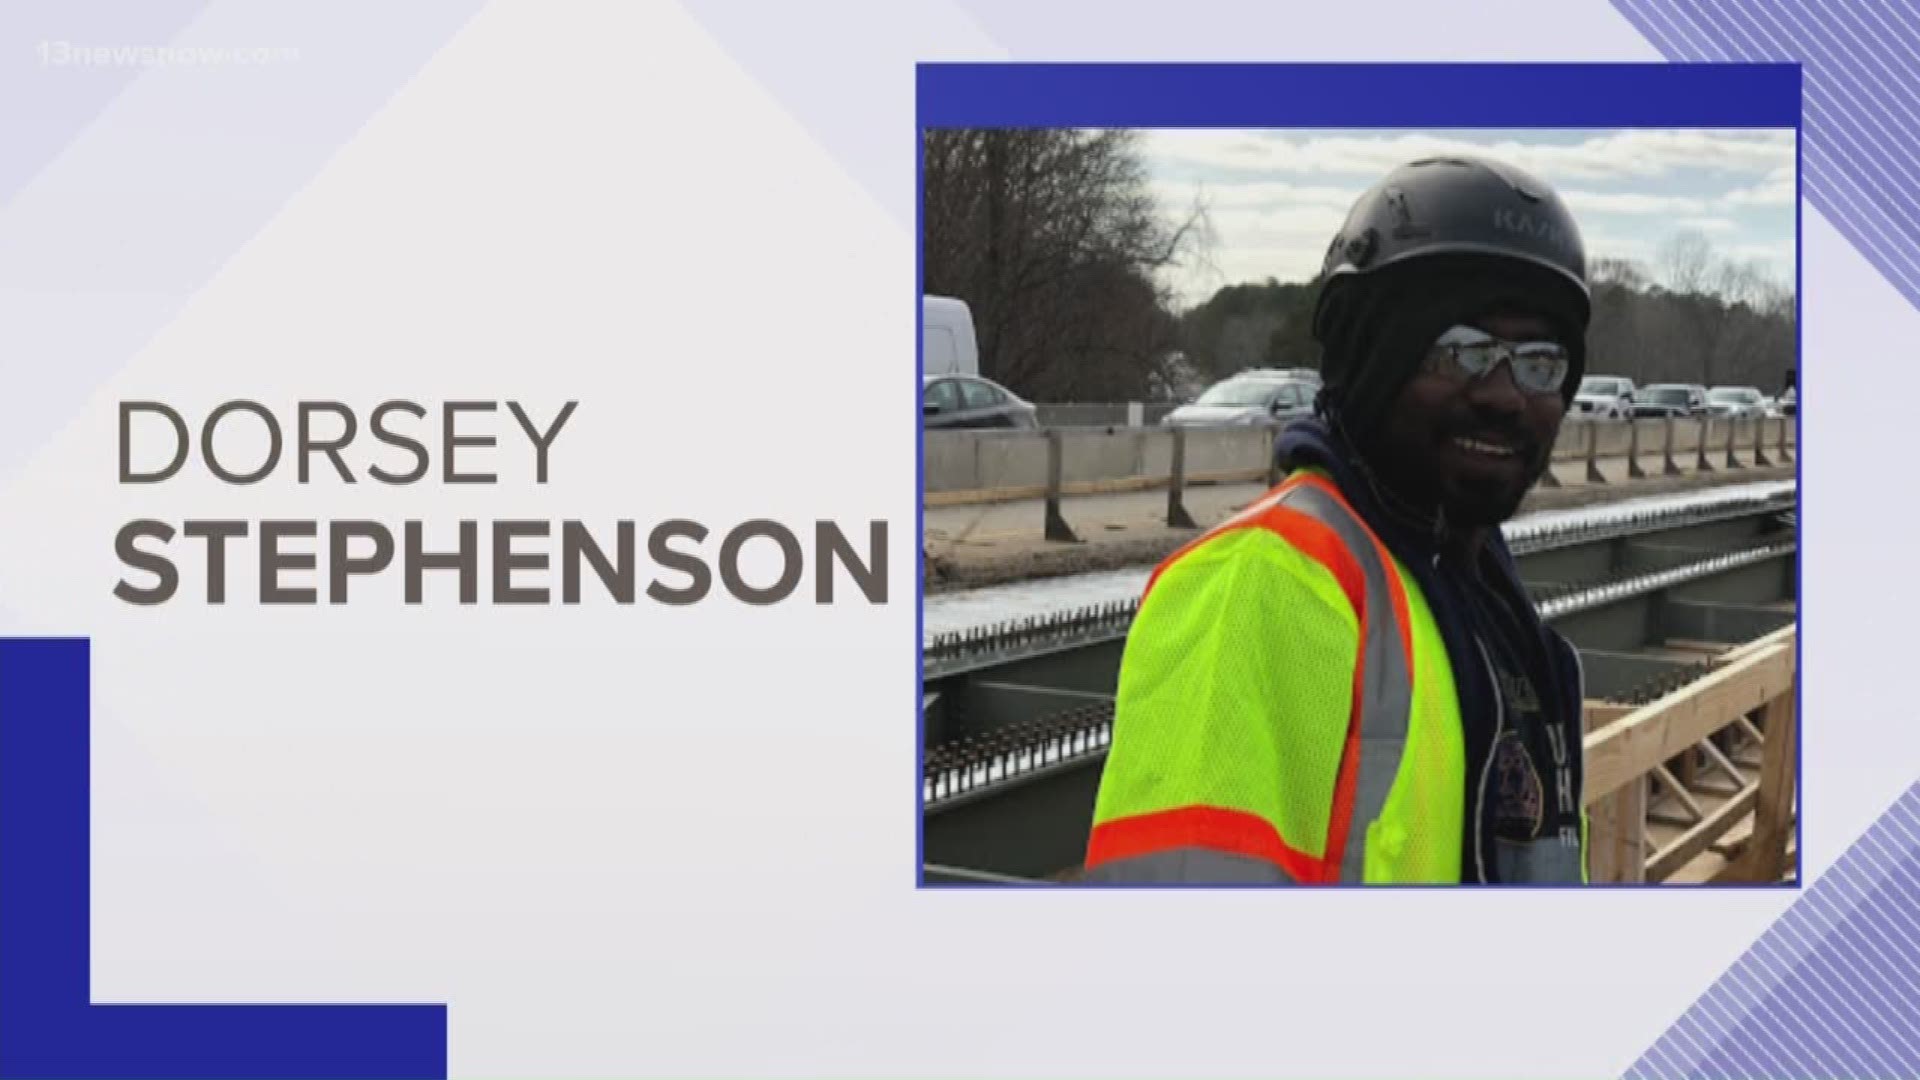 Friends and family of Dorsey Stephenson are mourning the loss of the 37-year-old.